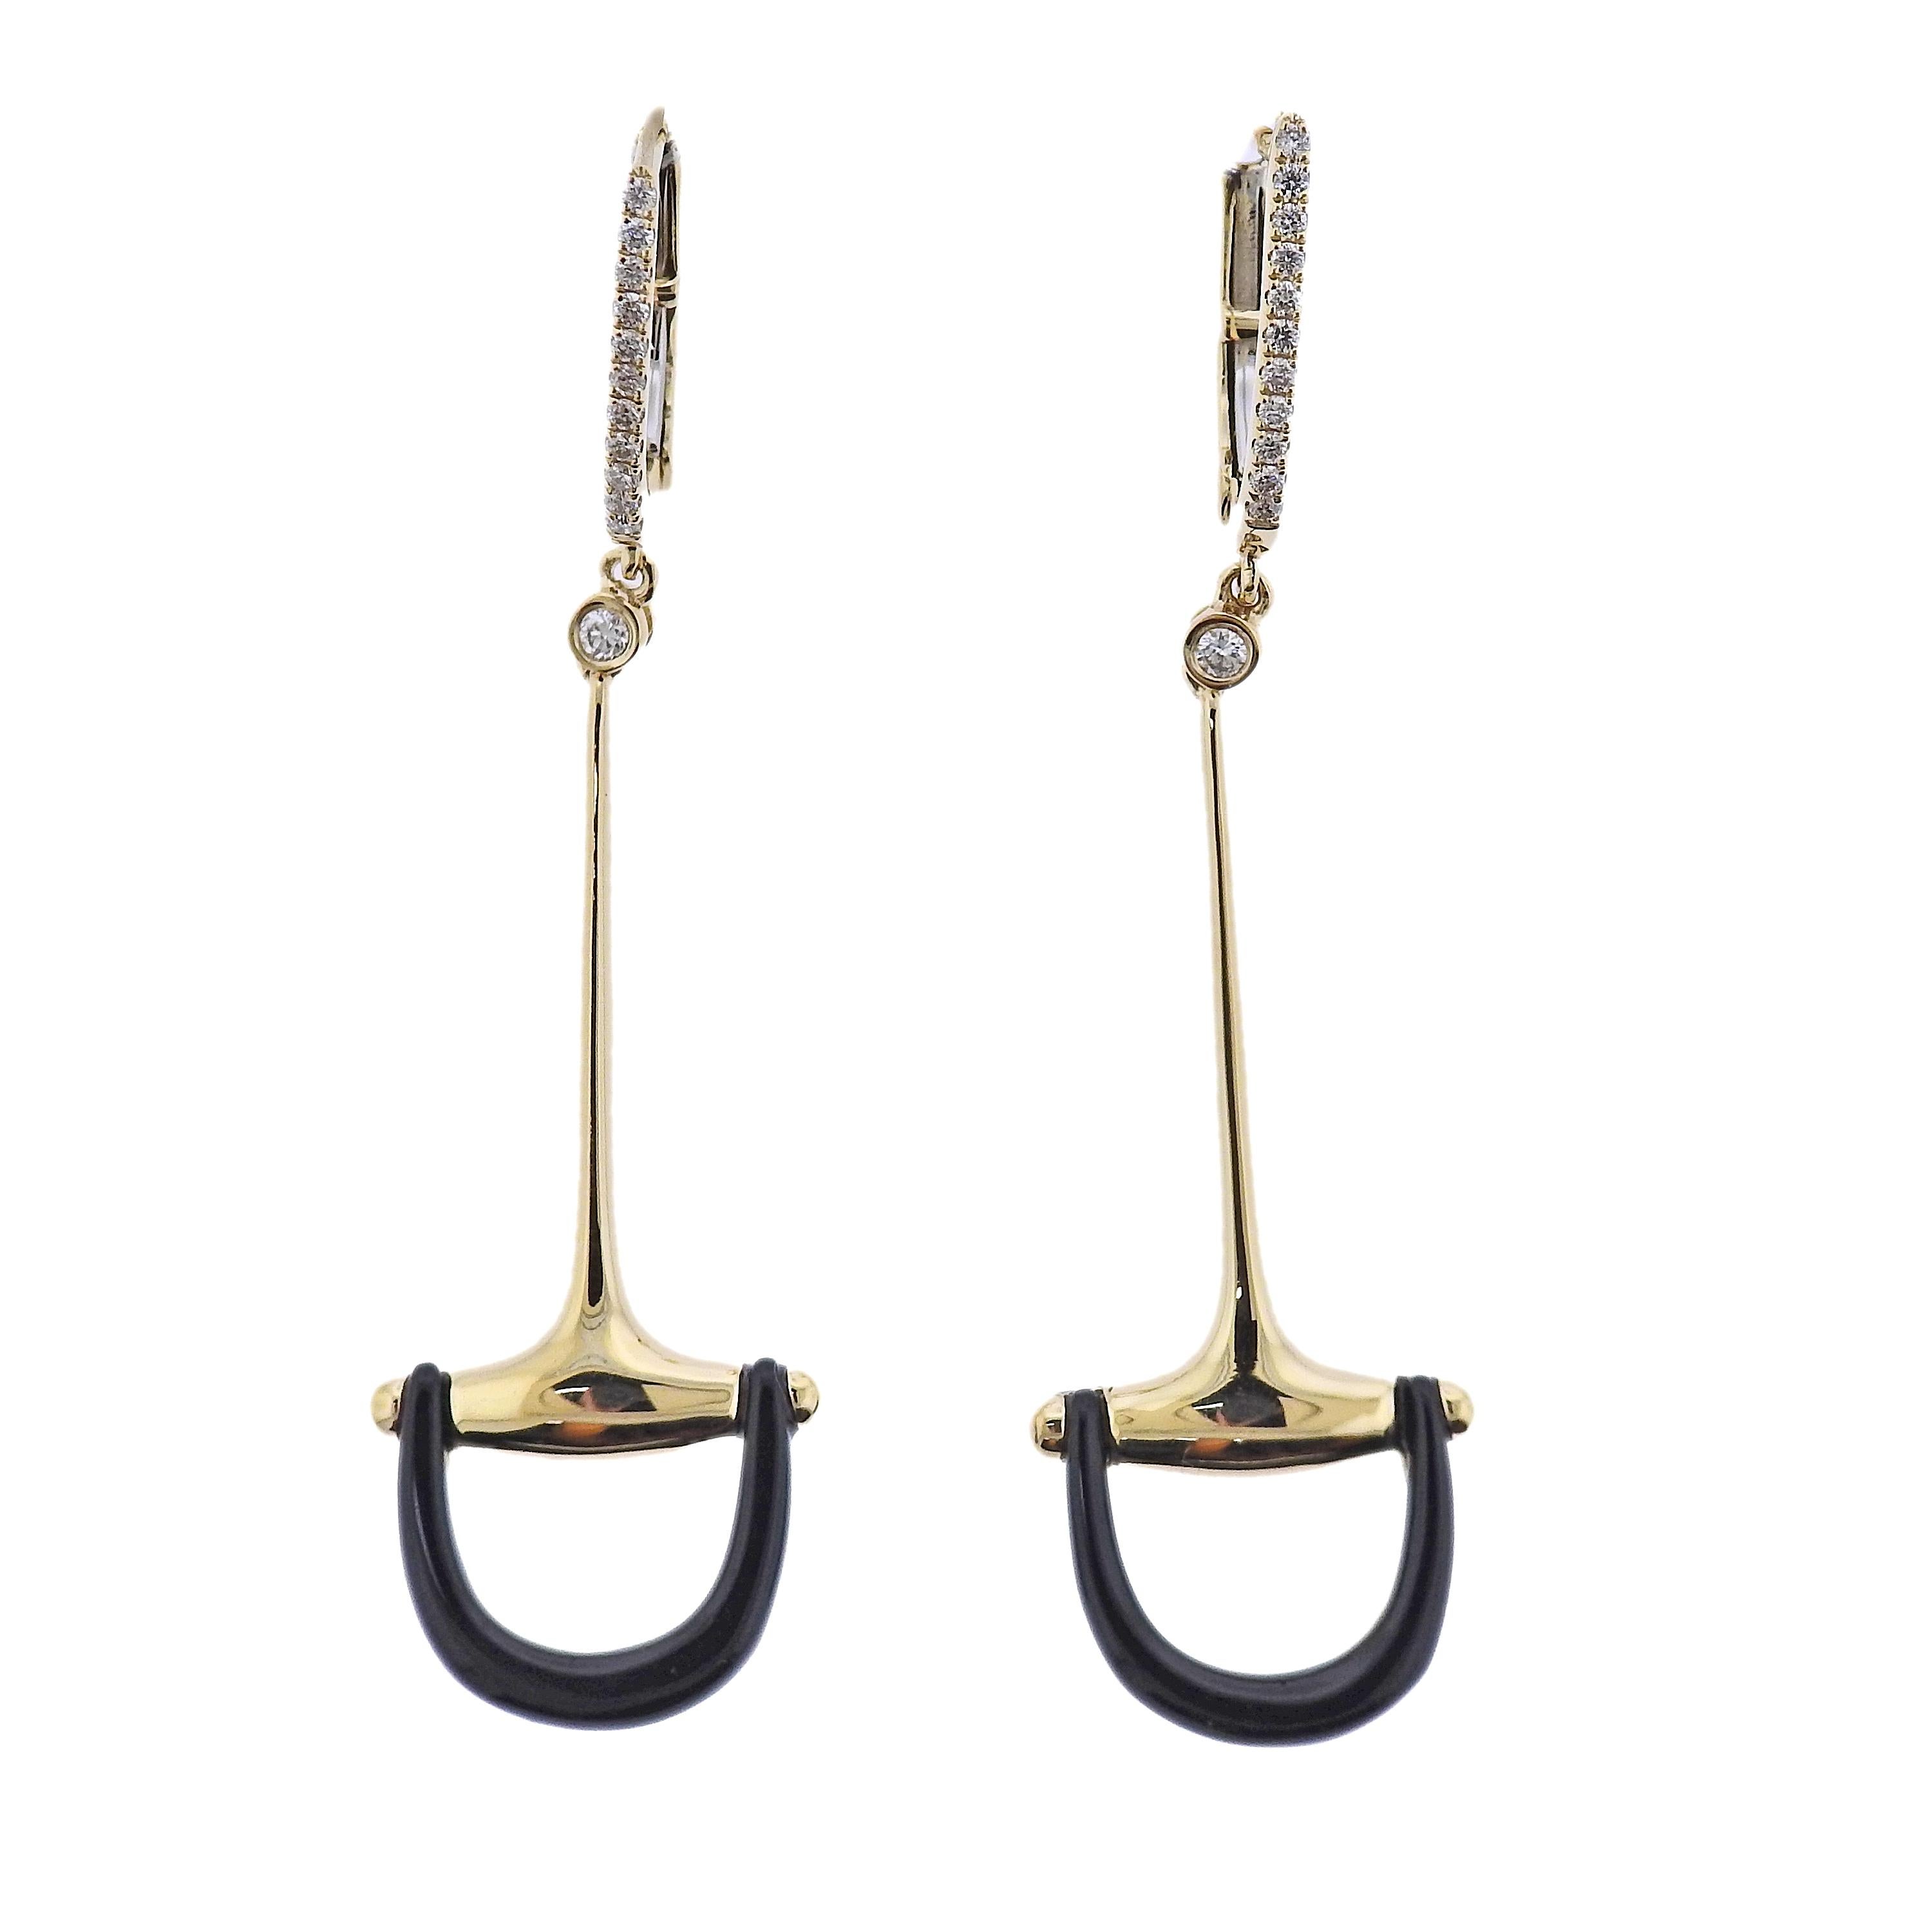 Brand new pair of 18k yellow gold horse bit earrings by Doves Doron Paloma , with onyx and 0.15ctw H/VS diamonds.  Earrings are 53mm long. Weight - 6 grams. Marked: 18k,  Dove hallmark. 